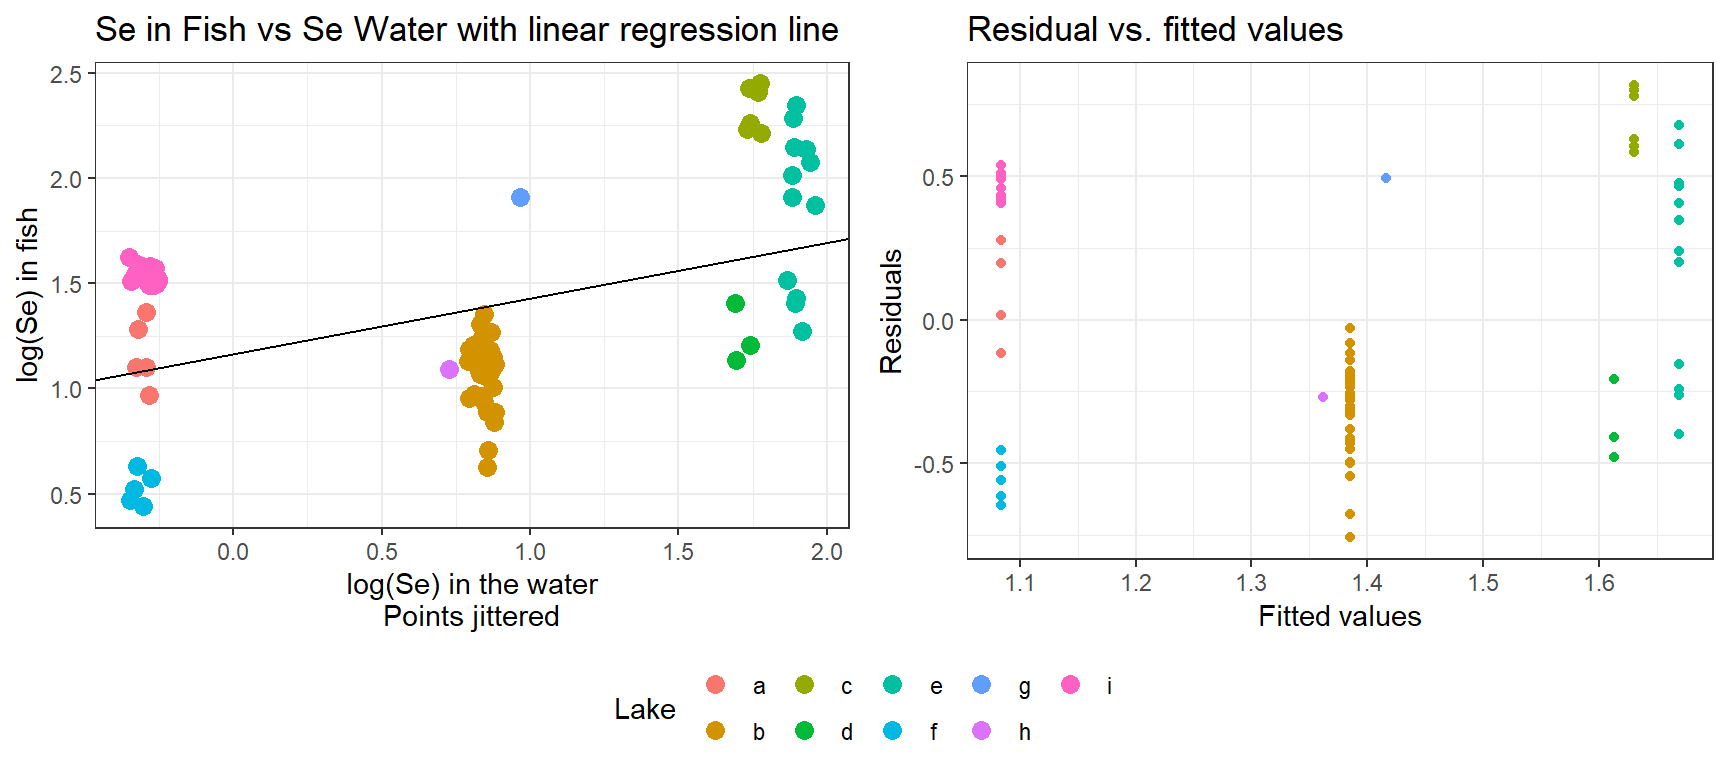 Plot of log(Selenium) concentrations in fish versus log(Selenium) concentration measured in nine lakes from which the fish were sampled (left panel). Residual versus fitted value plot for a linear regression model fit to these data, assuming all observations are independent.